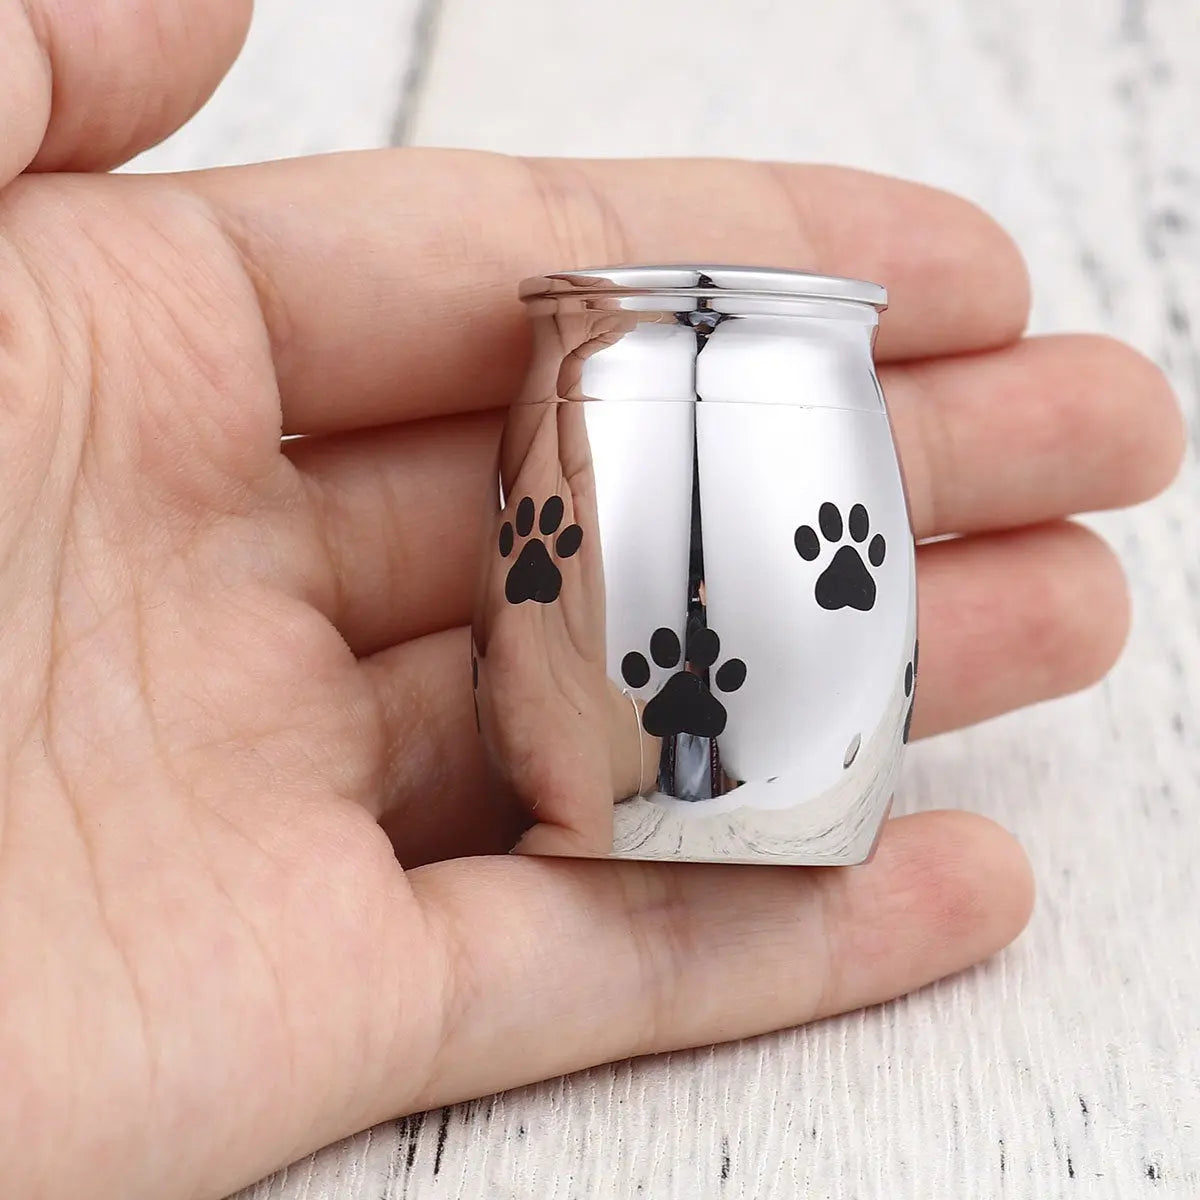 Cuore Keepsake Small Ashes Urn-Pet Urn for Ashes-Cremation Urns- The cremation urns for ashes and keepsakes for ashes come in a variety of styles to suit most tastes, decor and different volumes of funeral ashes.